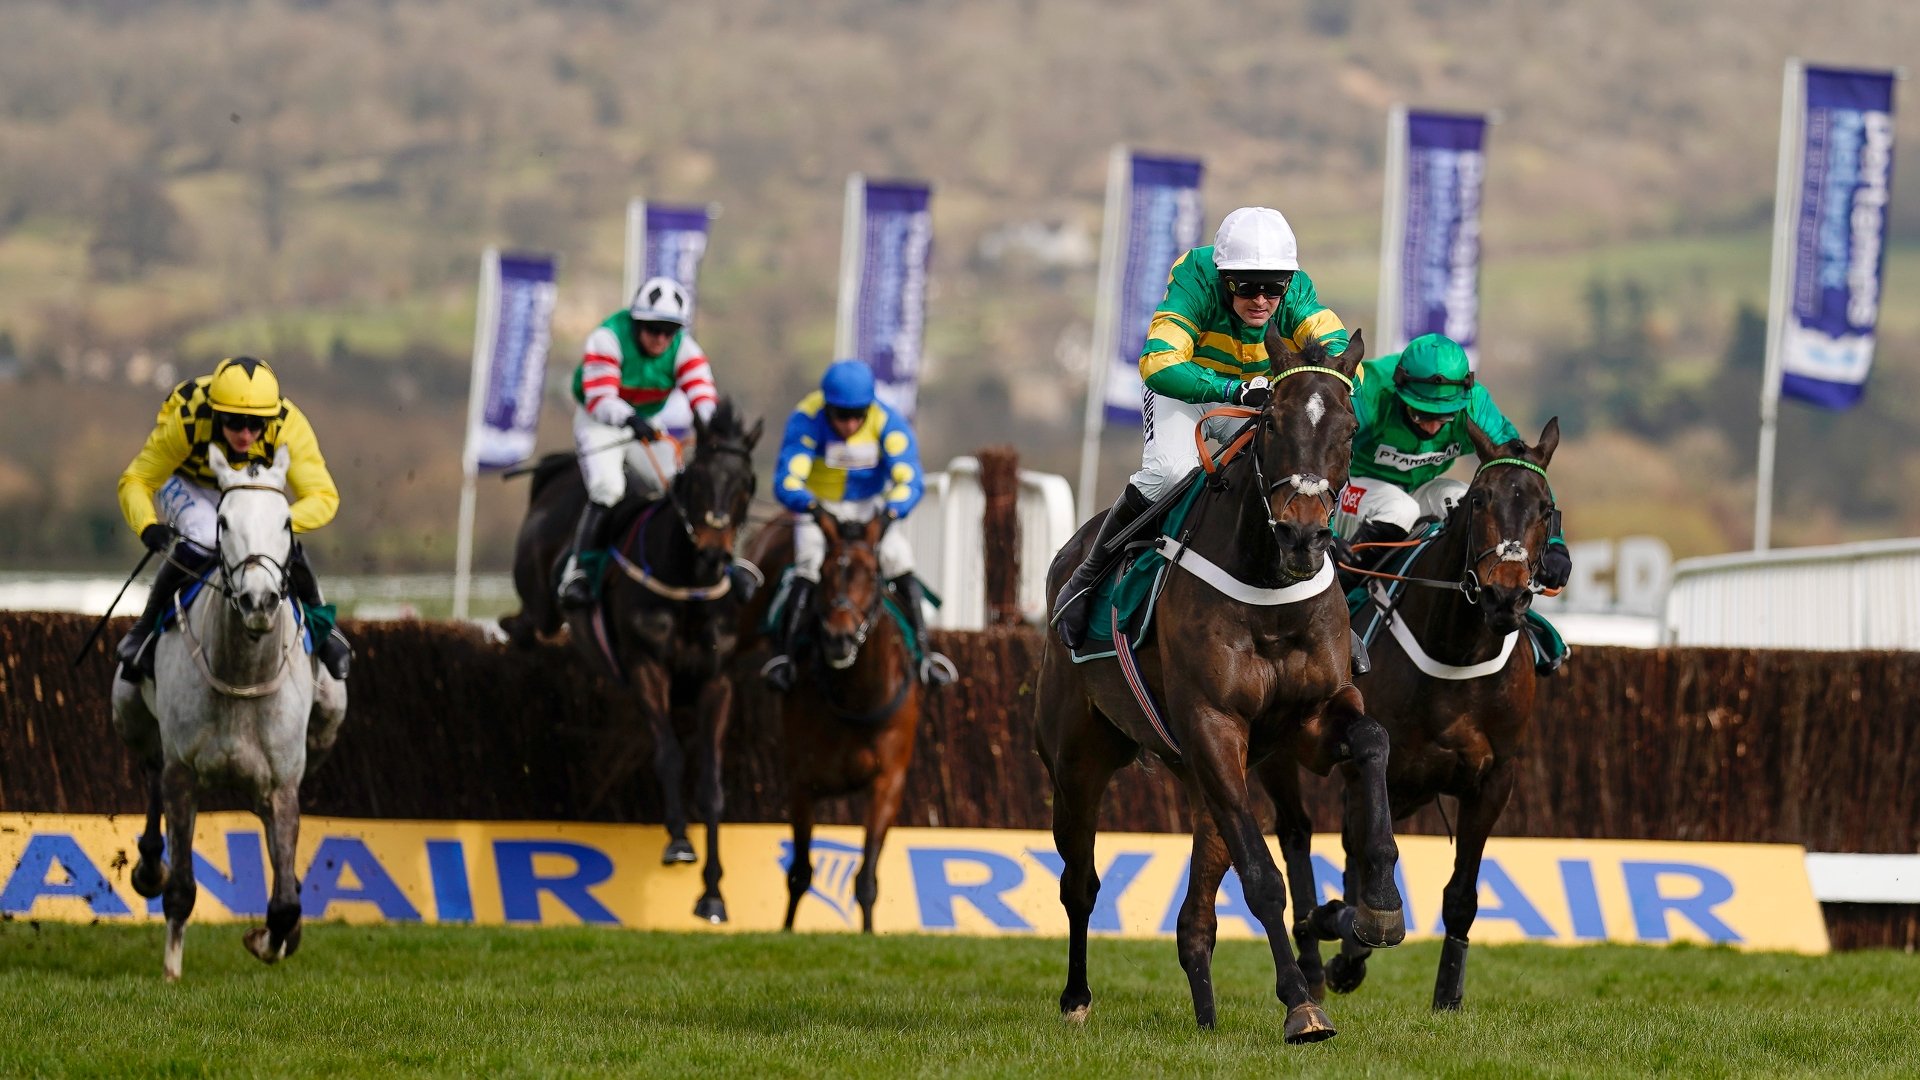 Turners' Novices' Chase 2023 Tips - Irish challenger worth backing each-way